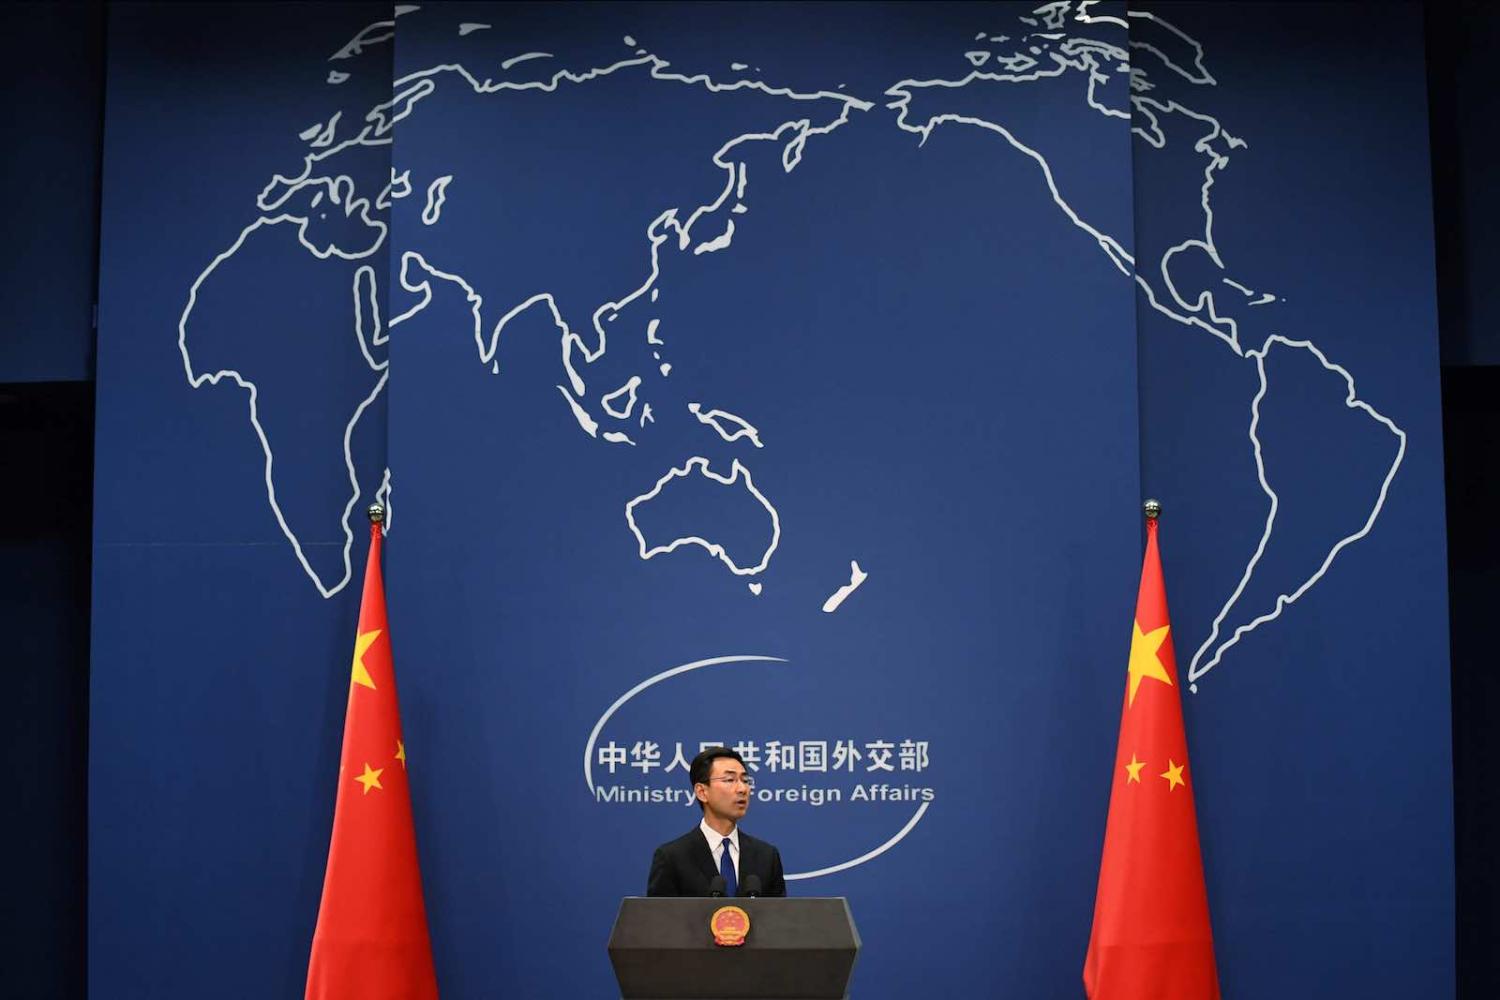 Chinese Foreign Ministry daily press briefing (Greg Barker/AFP via Getty Images)